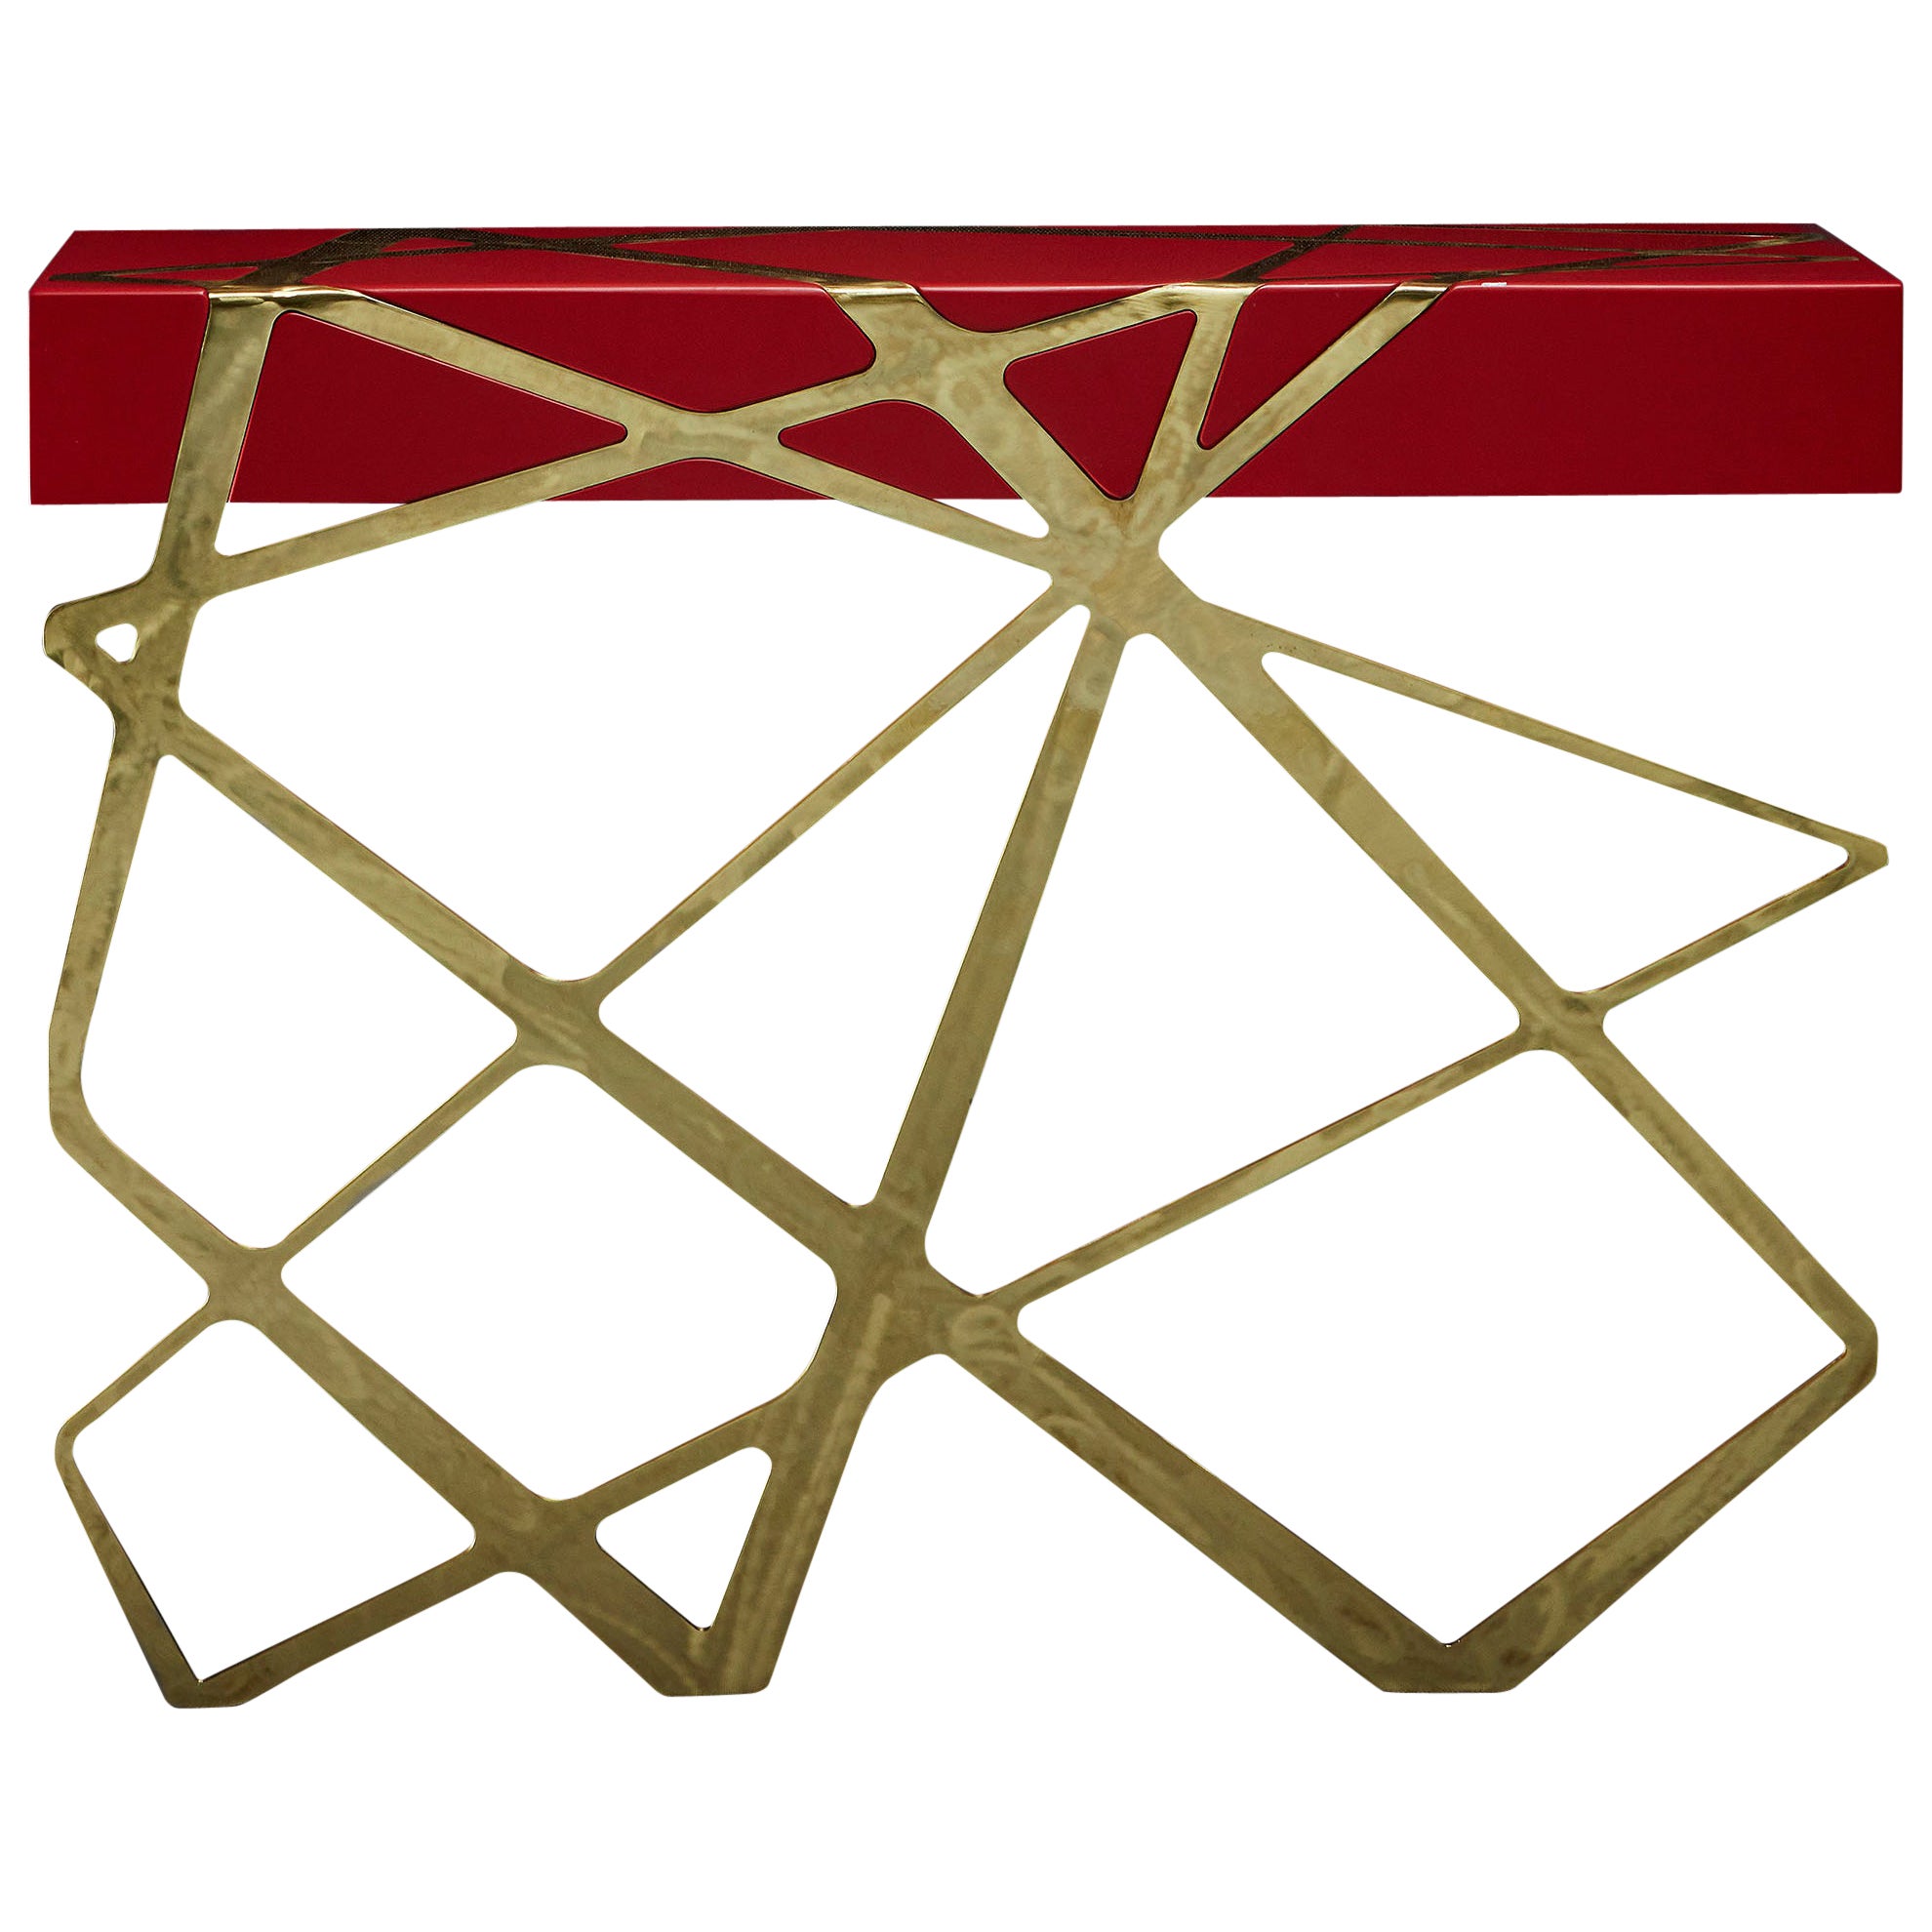 21st Century Modern Console Table in Red Lacquer and Brass Showroom Sample